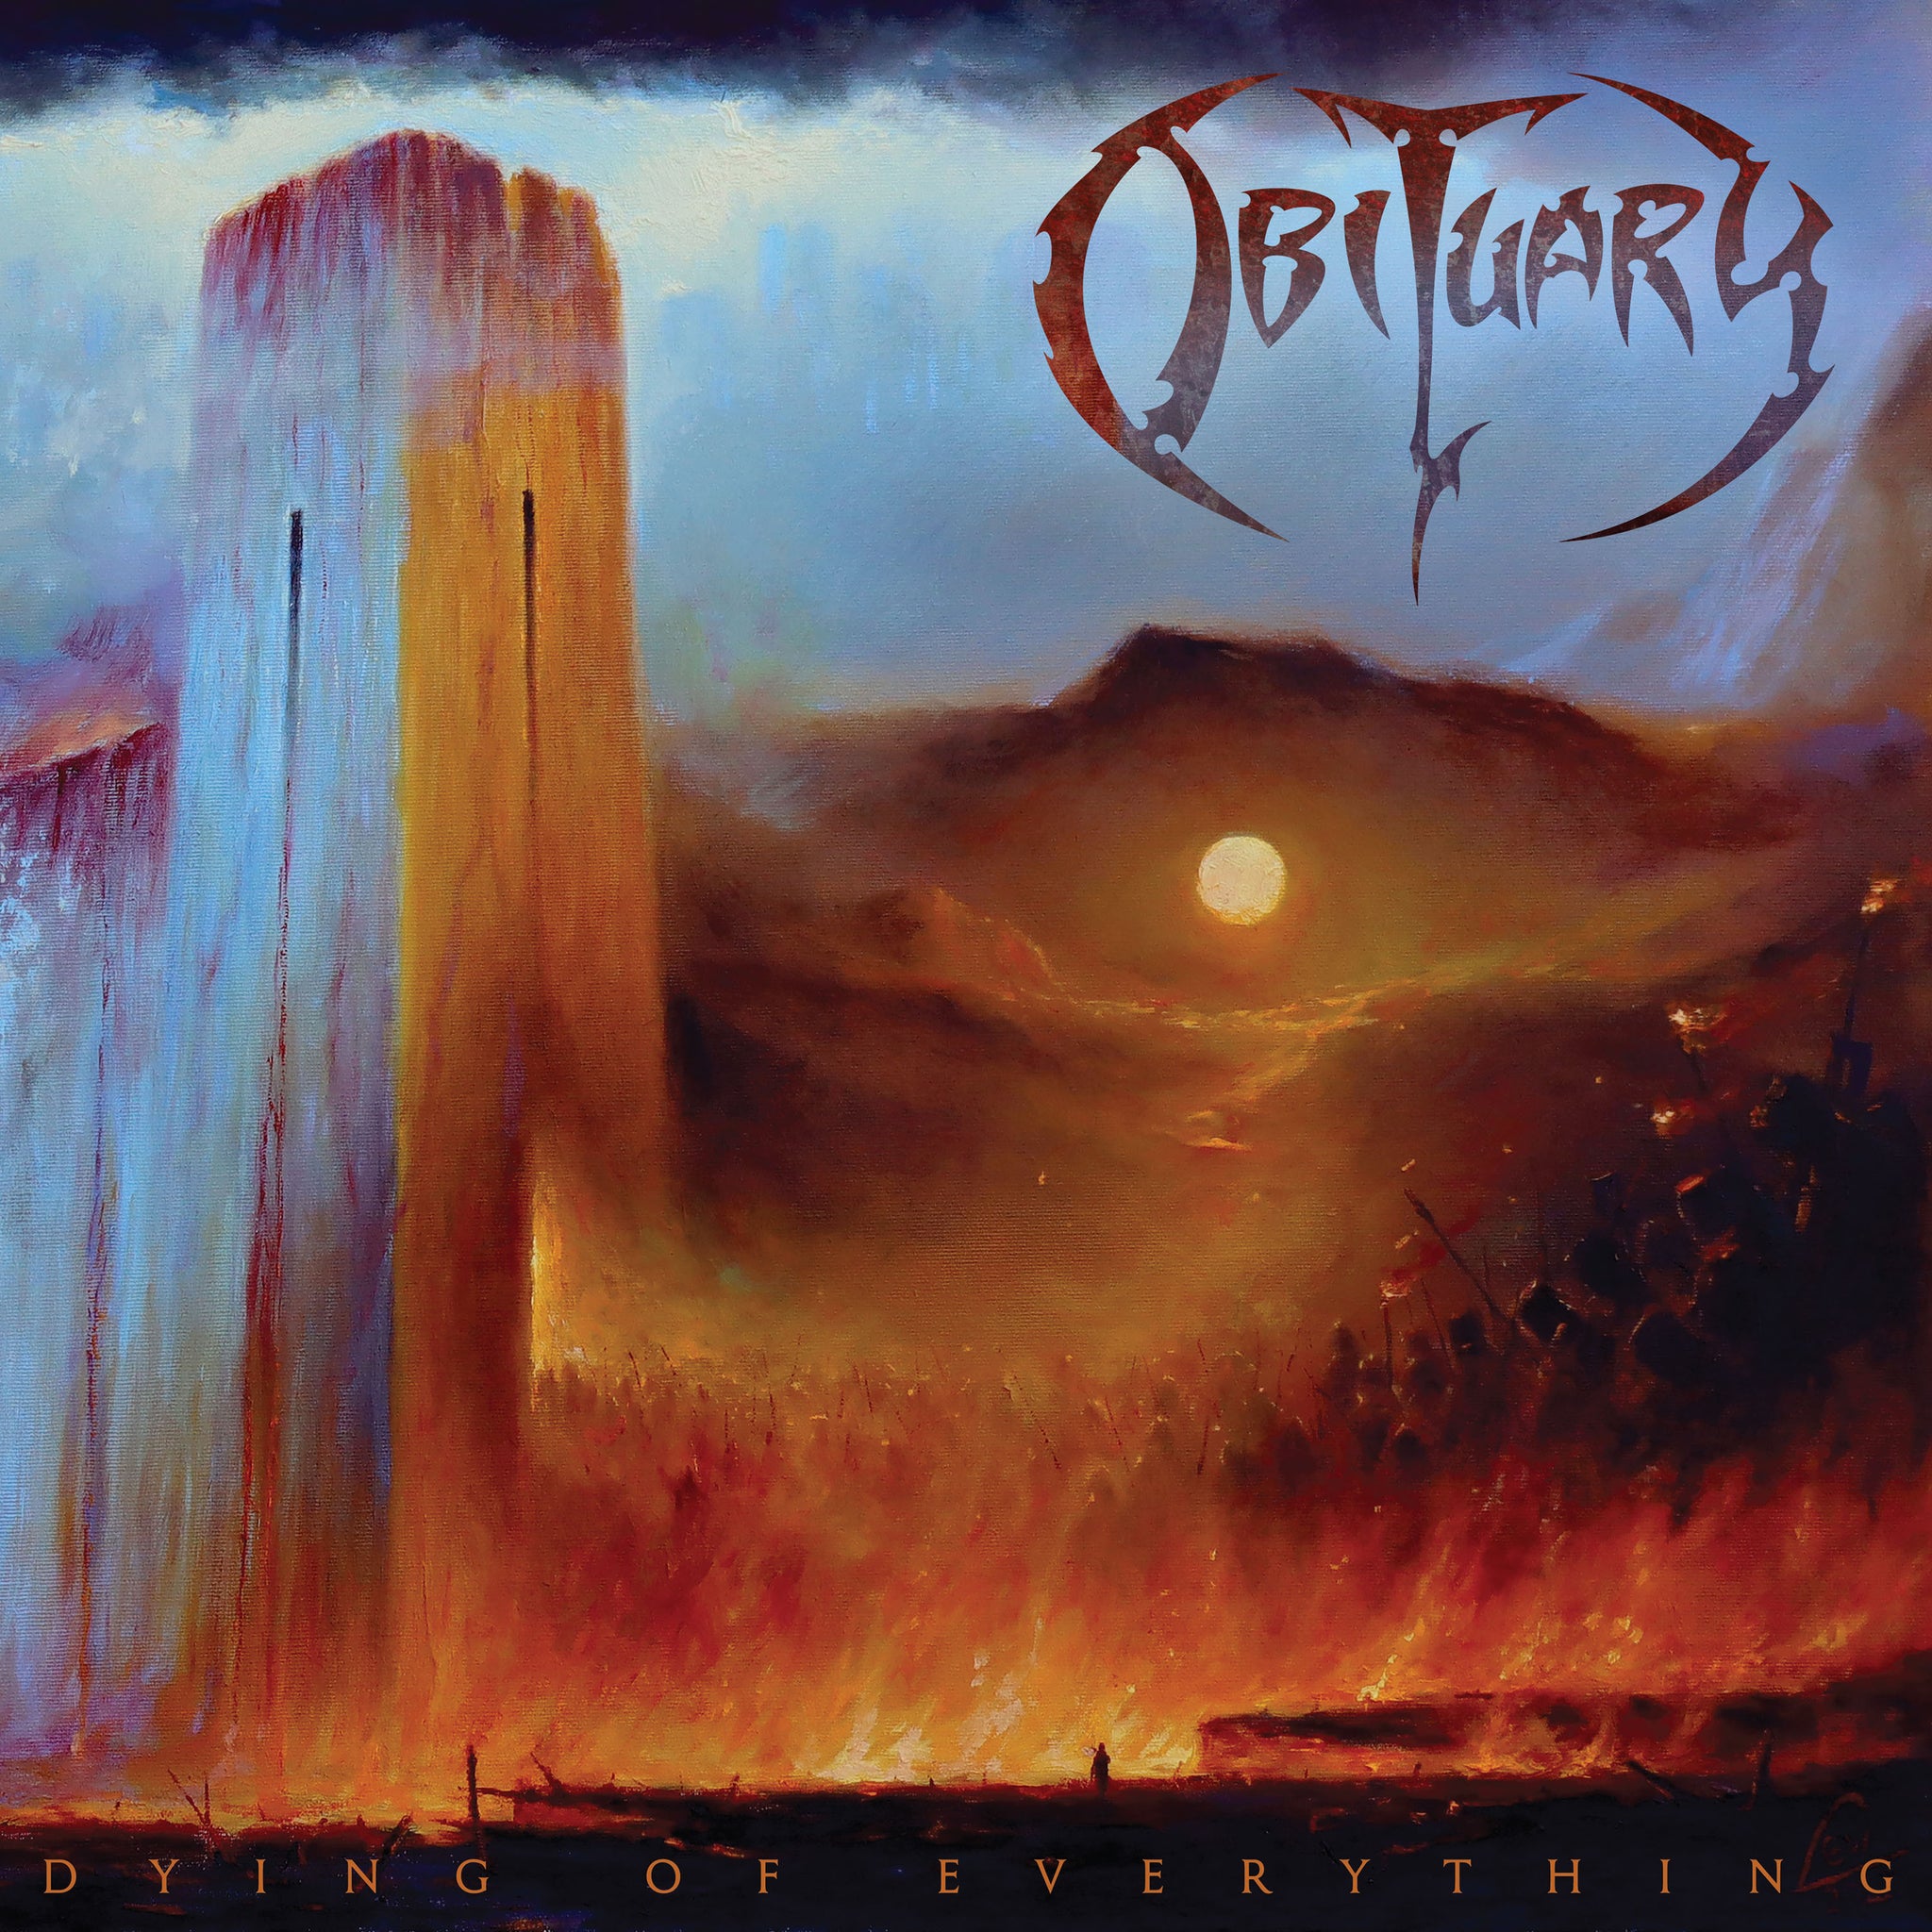 OBITUARY - DYING OF EVERYTHING Vinyl LP